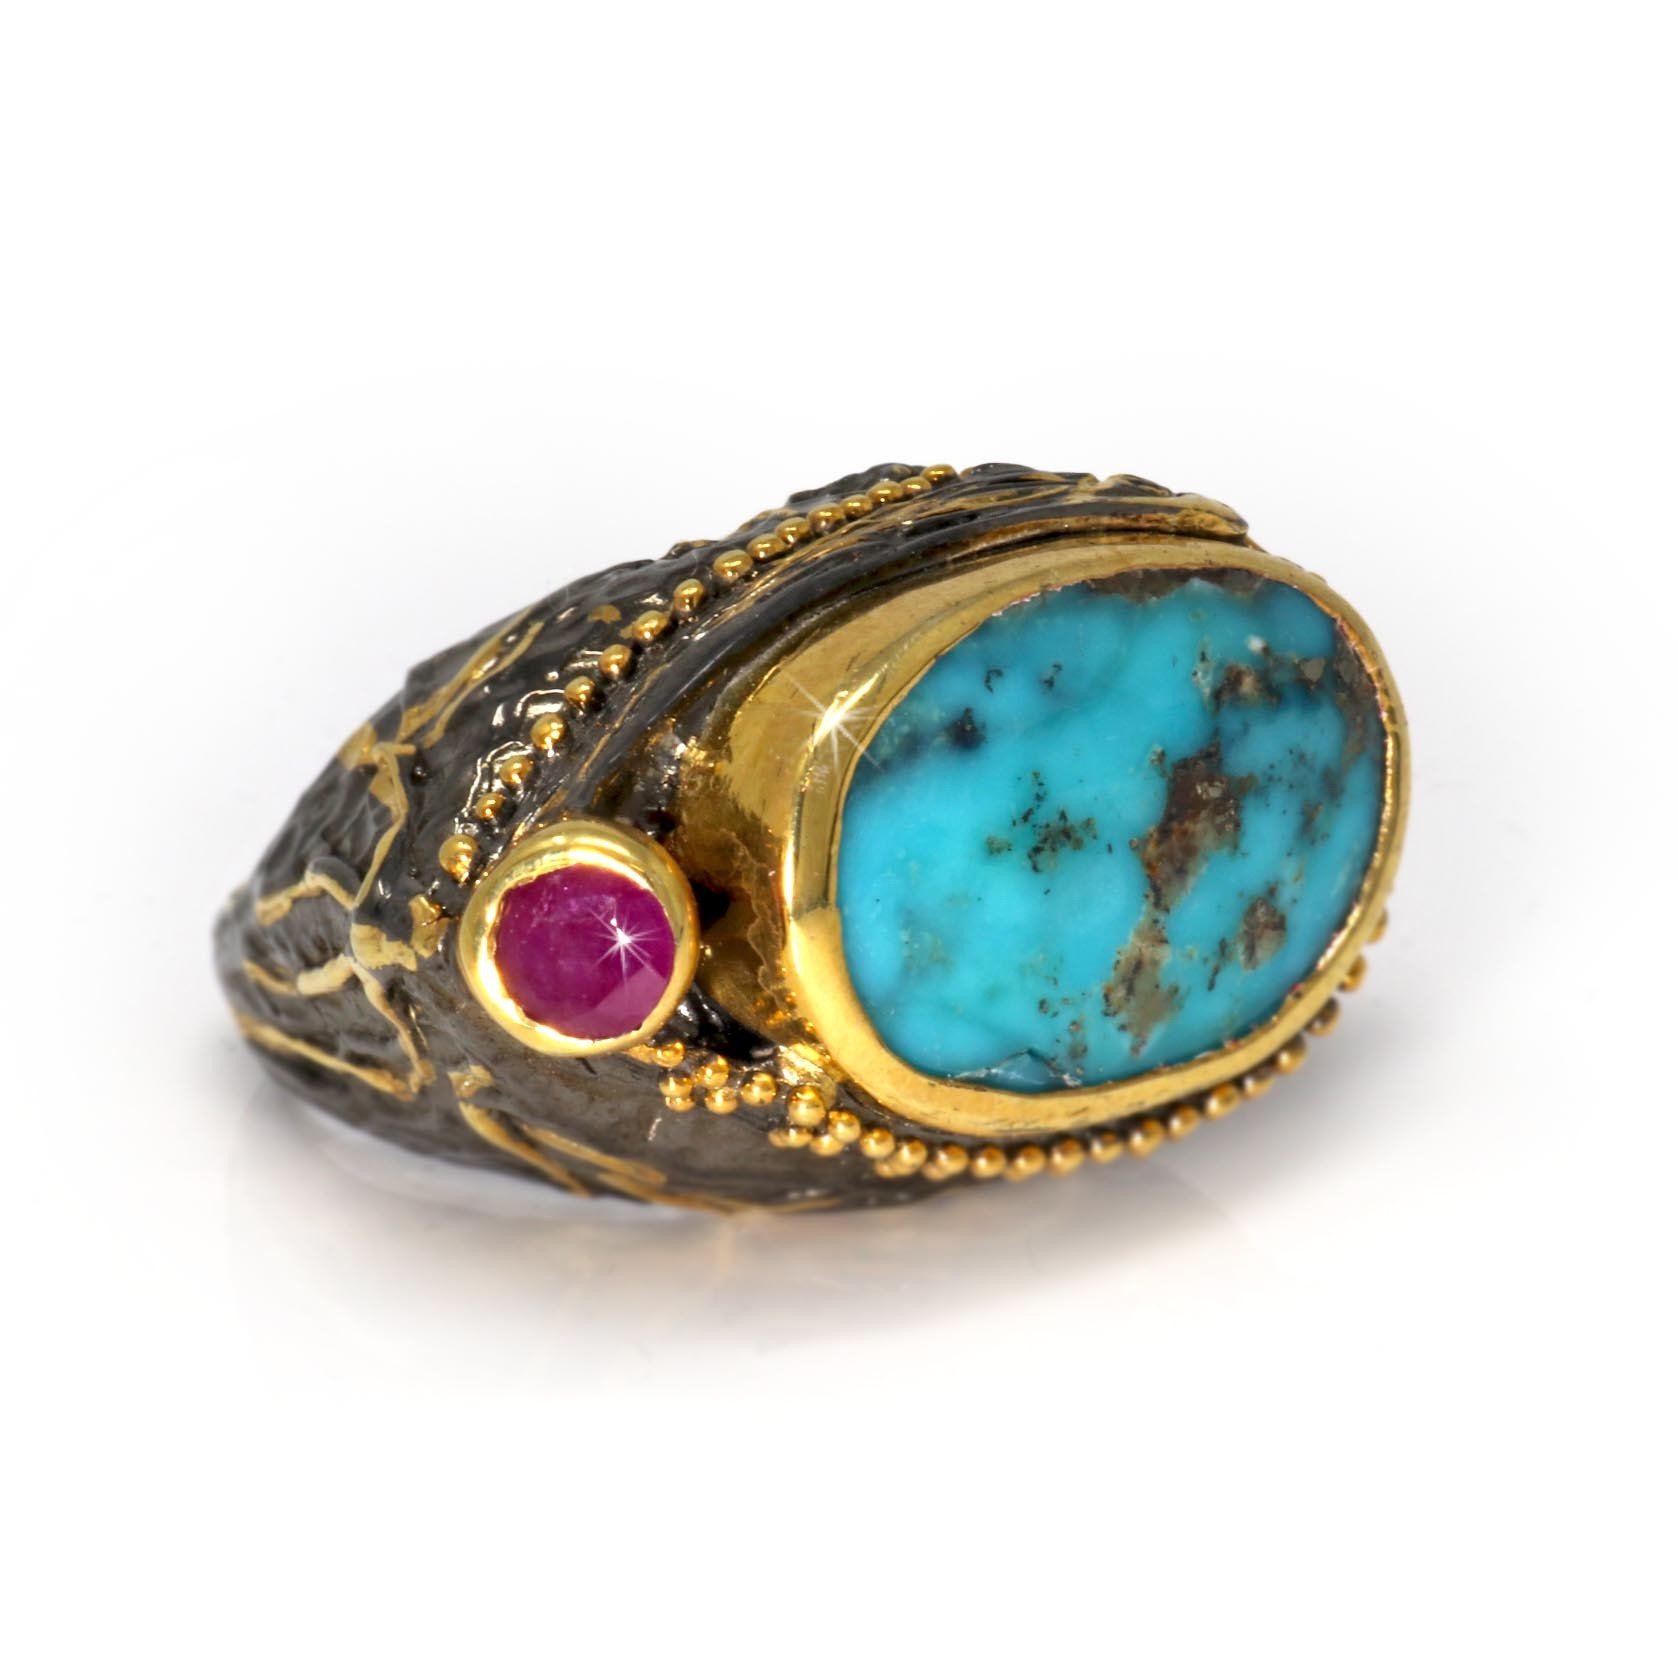 Persian Turquoise Ring Size 8.5 - Flat Cut Oval & Faceted Ruby Round With Gold Vermeil Bezels & Beading On Ornate Oxidized Sterling Silver Band With Flying Crane Design & Gold Vermeil Accents